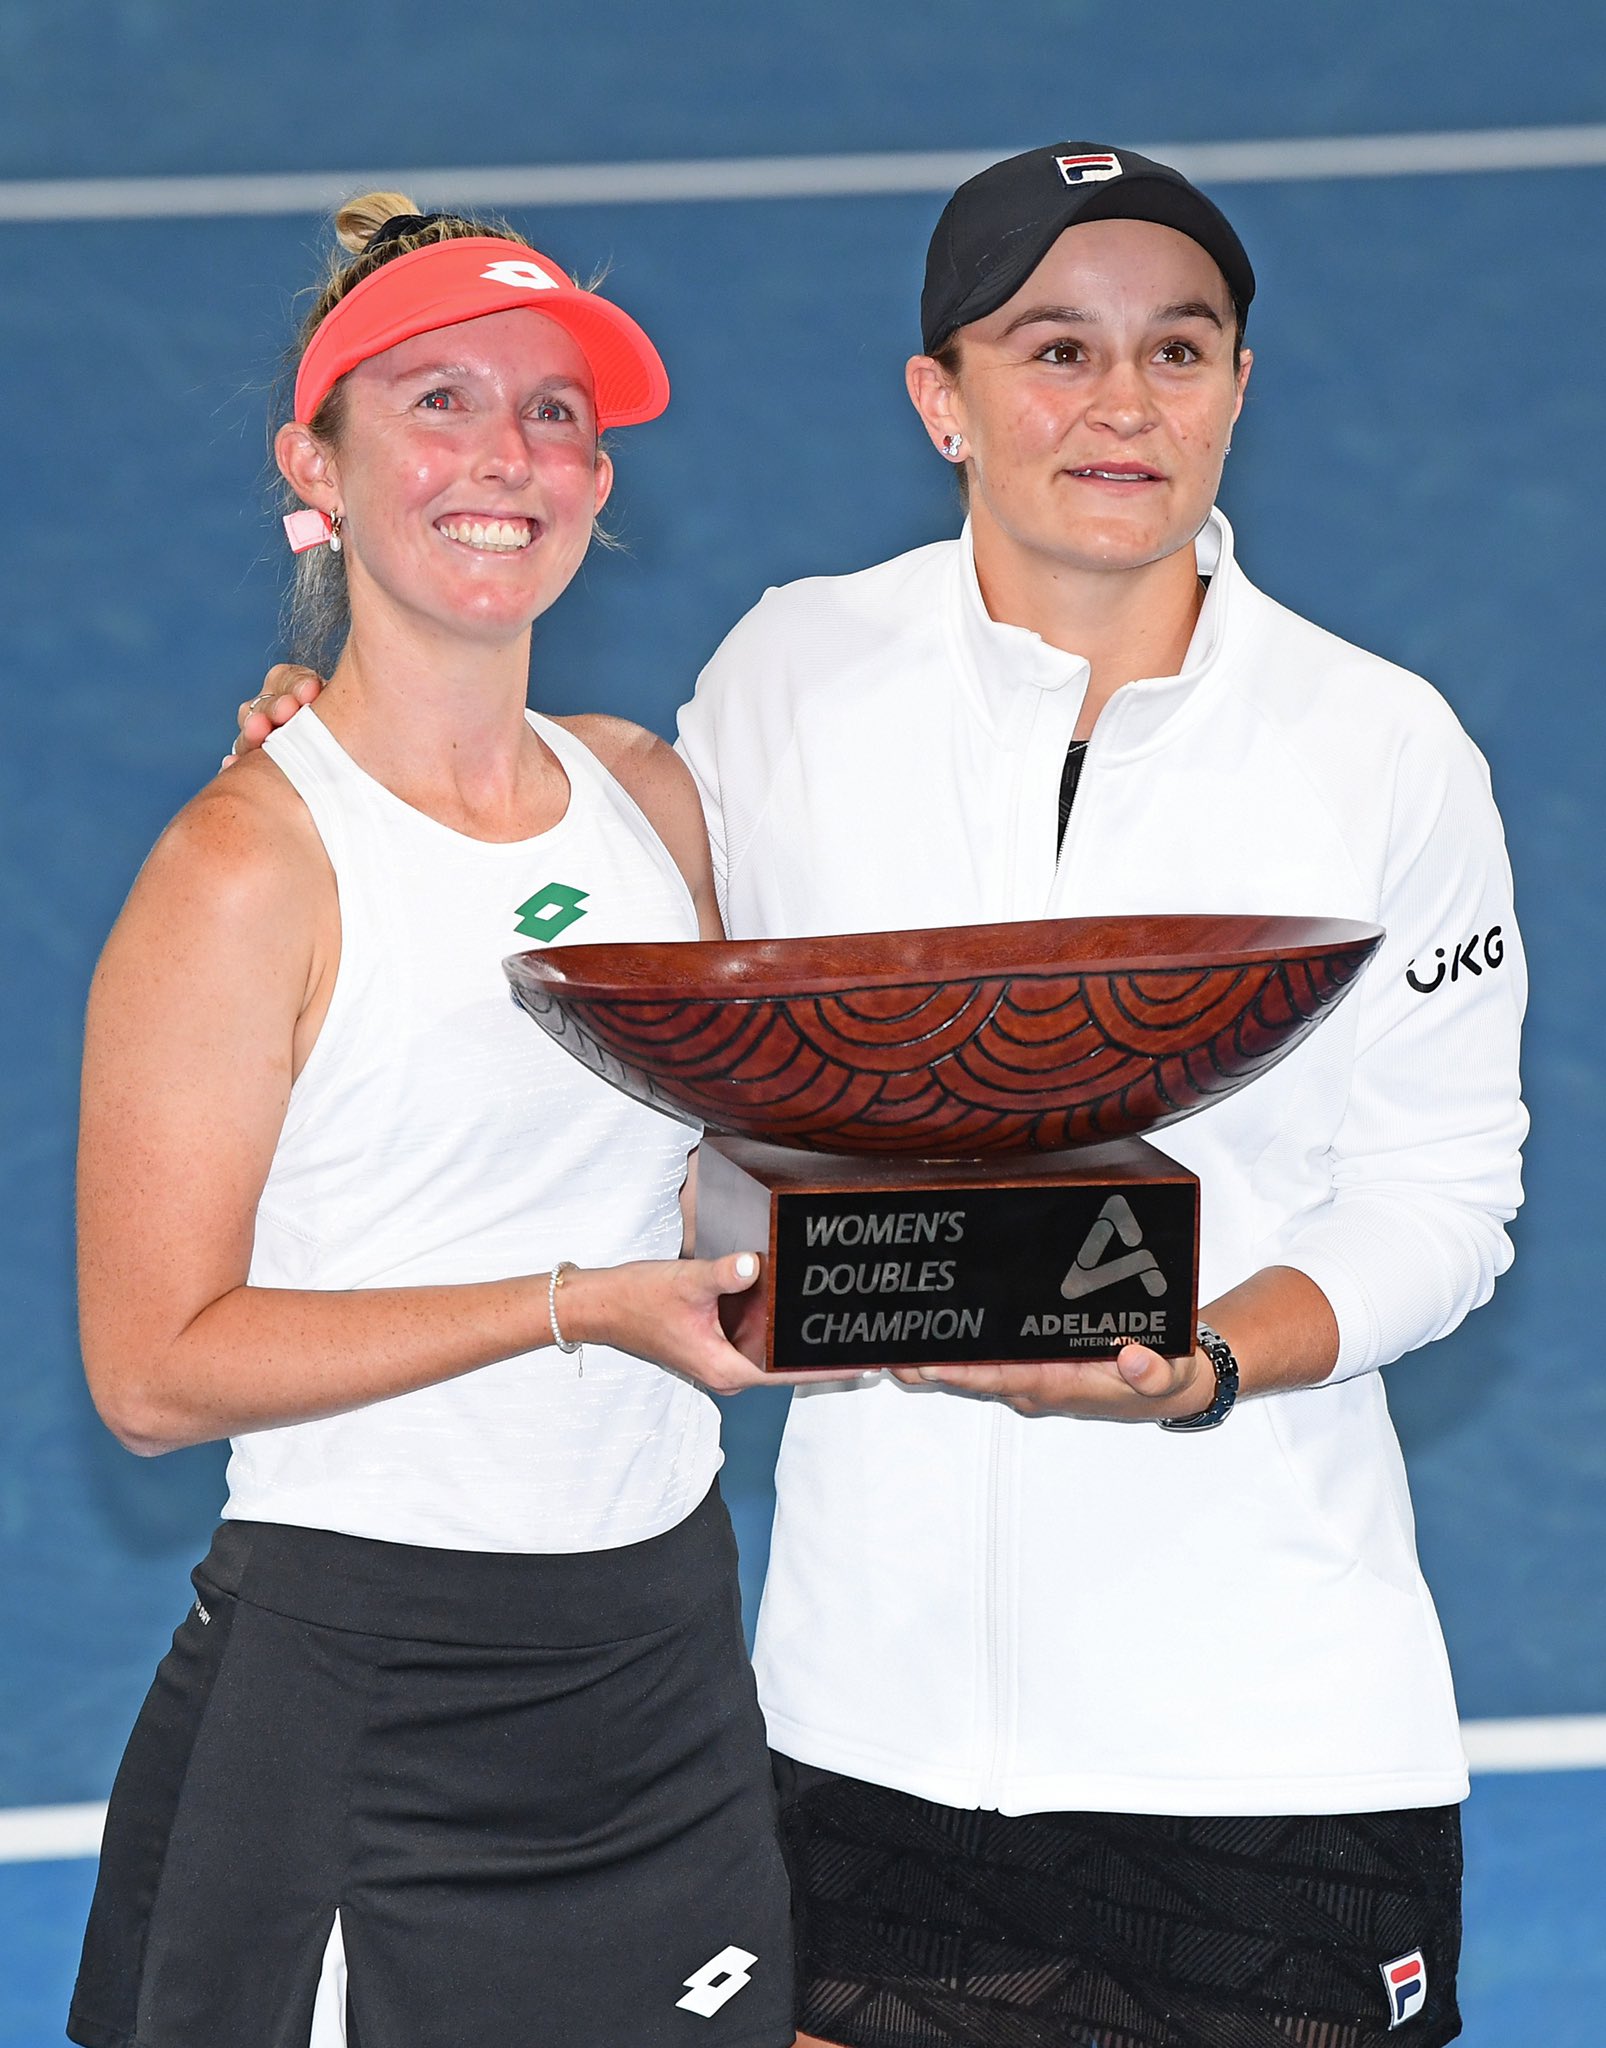 Storm Sanders and Ashleigh Barty of Australia  with the Womens Doubles Champion Trophy after defeating Darija Jurak Schreiber of Croatia and Andreja Klepac of Slovenia during day eight of the 2022 Adelaide International at Memorial Drive on January 09, 2022 in Adelaide, Australia.